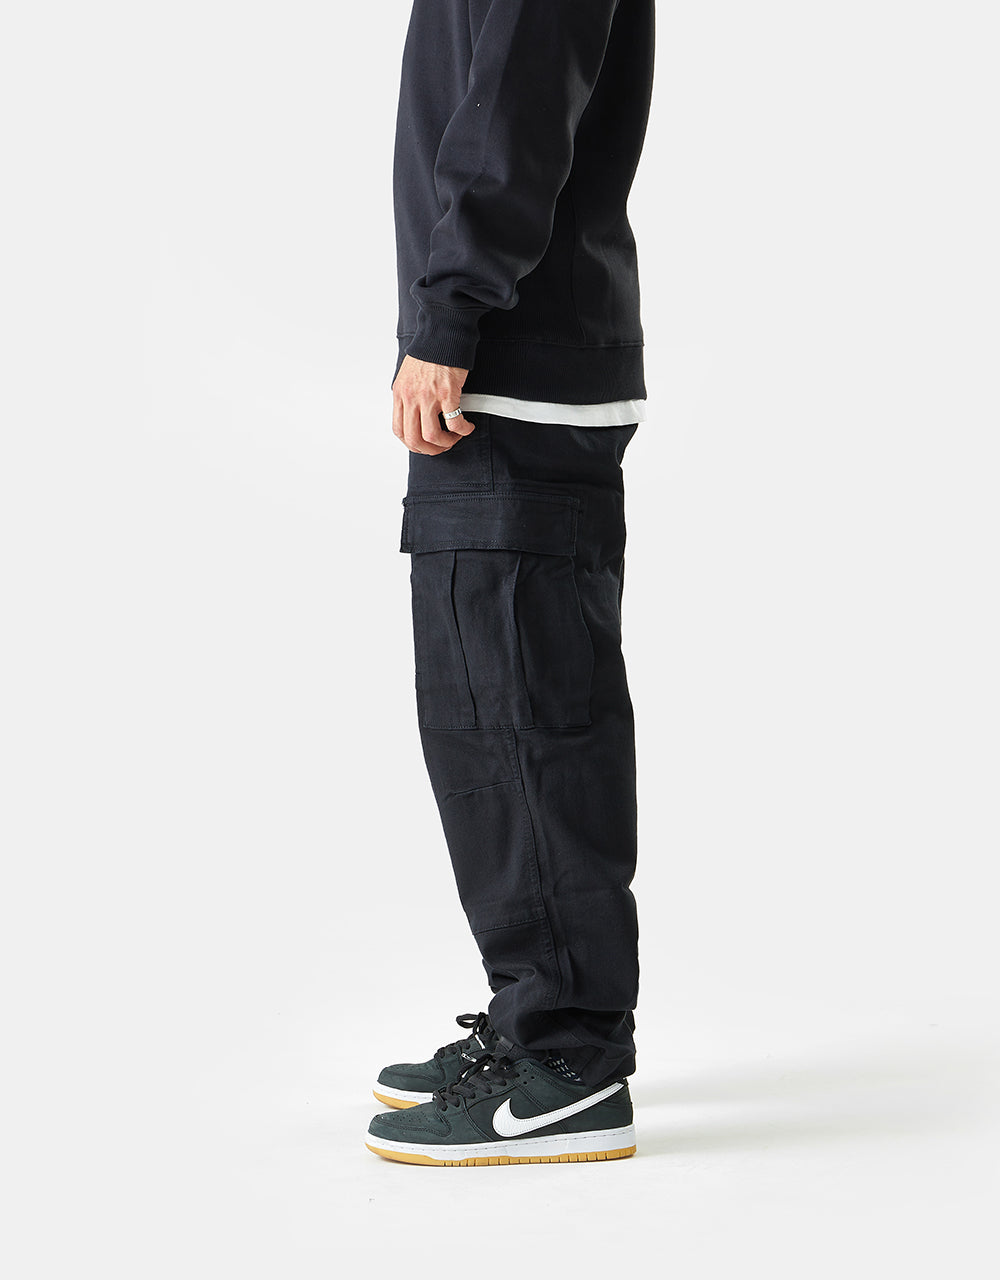 Route One Classic Cargo Pants - Black